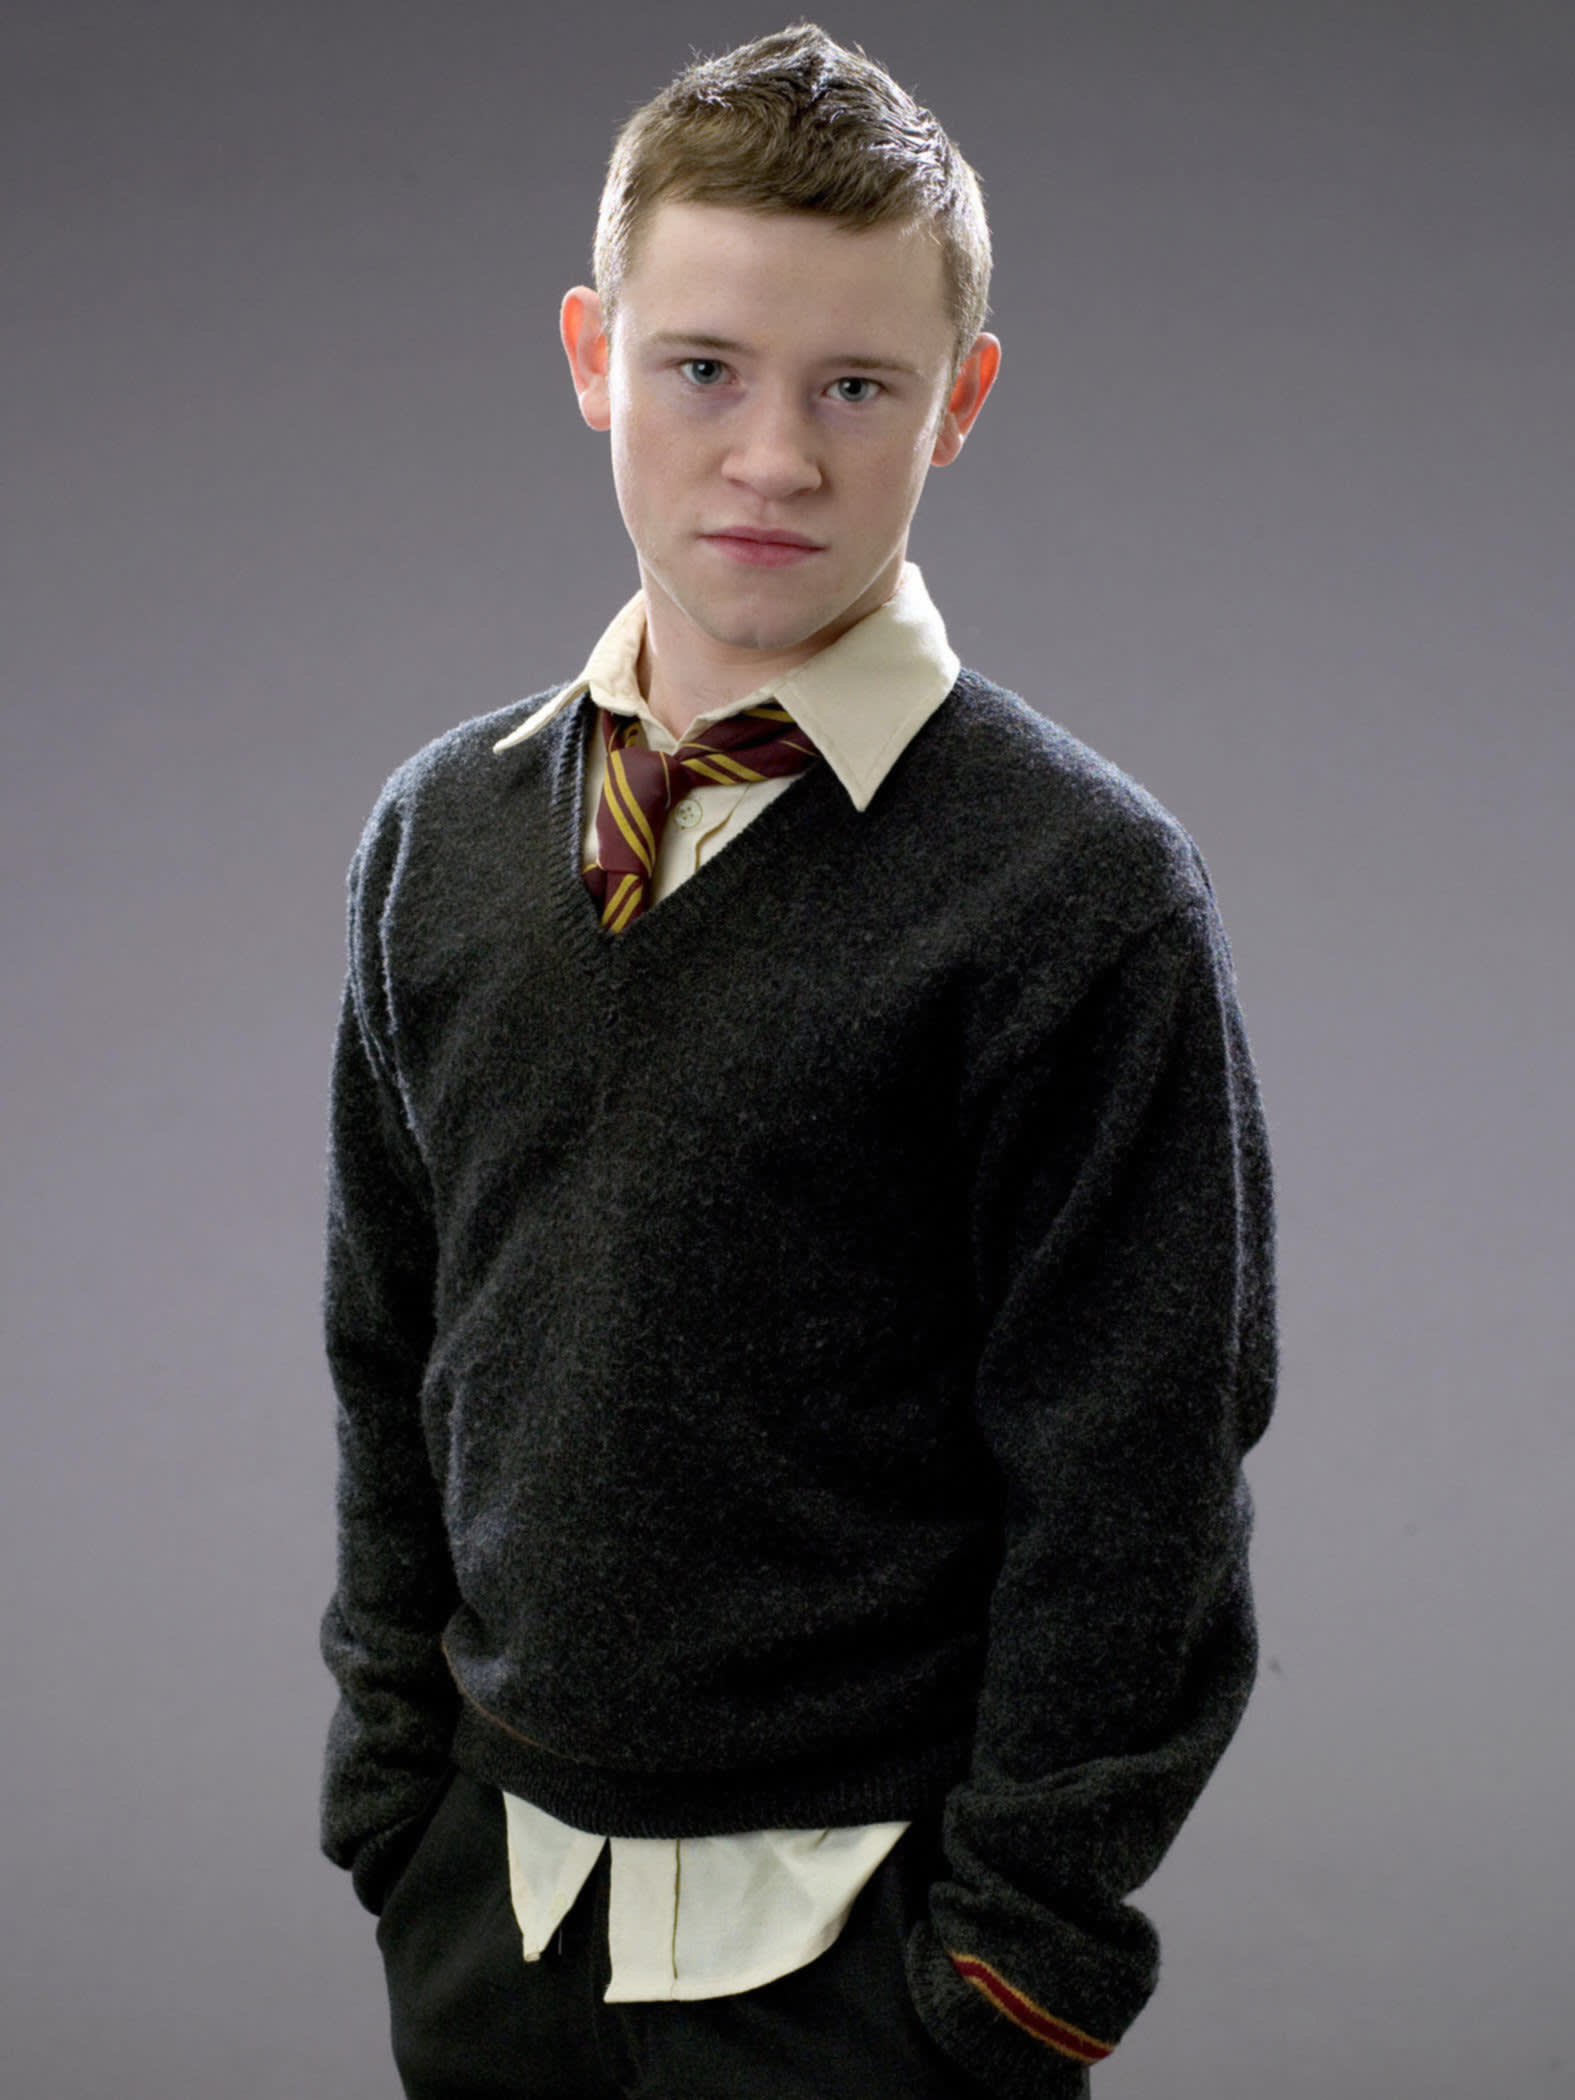 Seamus in his school uniform from the Order of the Pheonix 